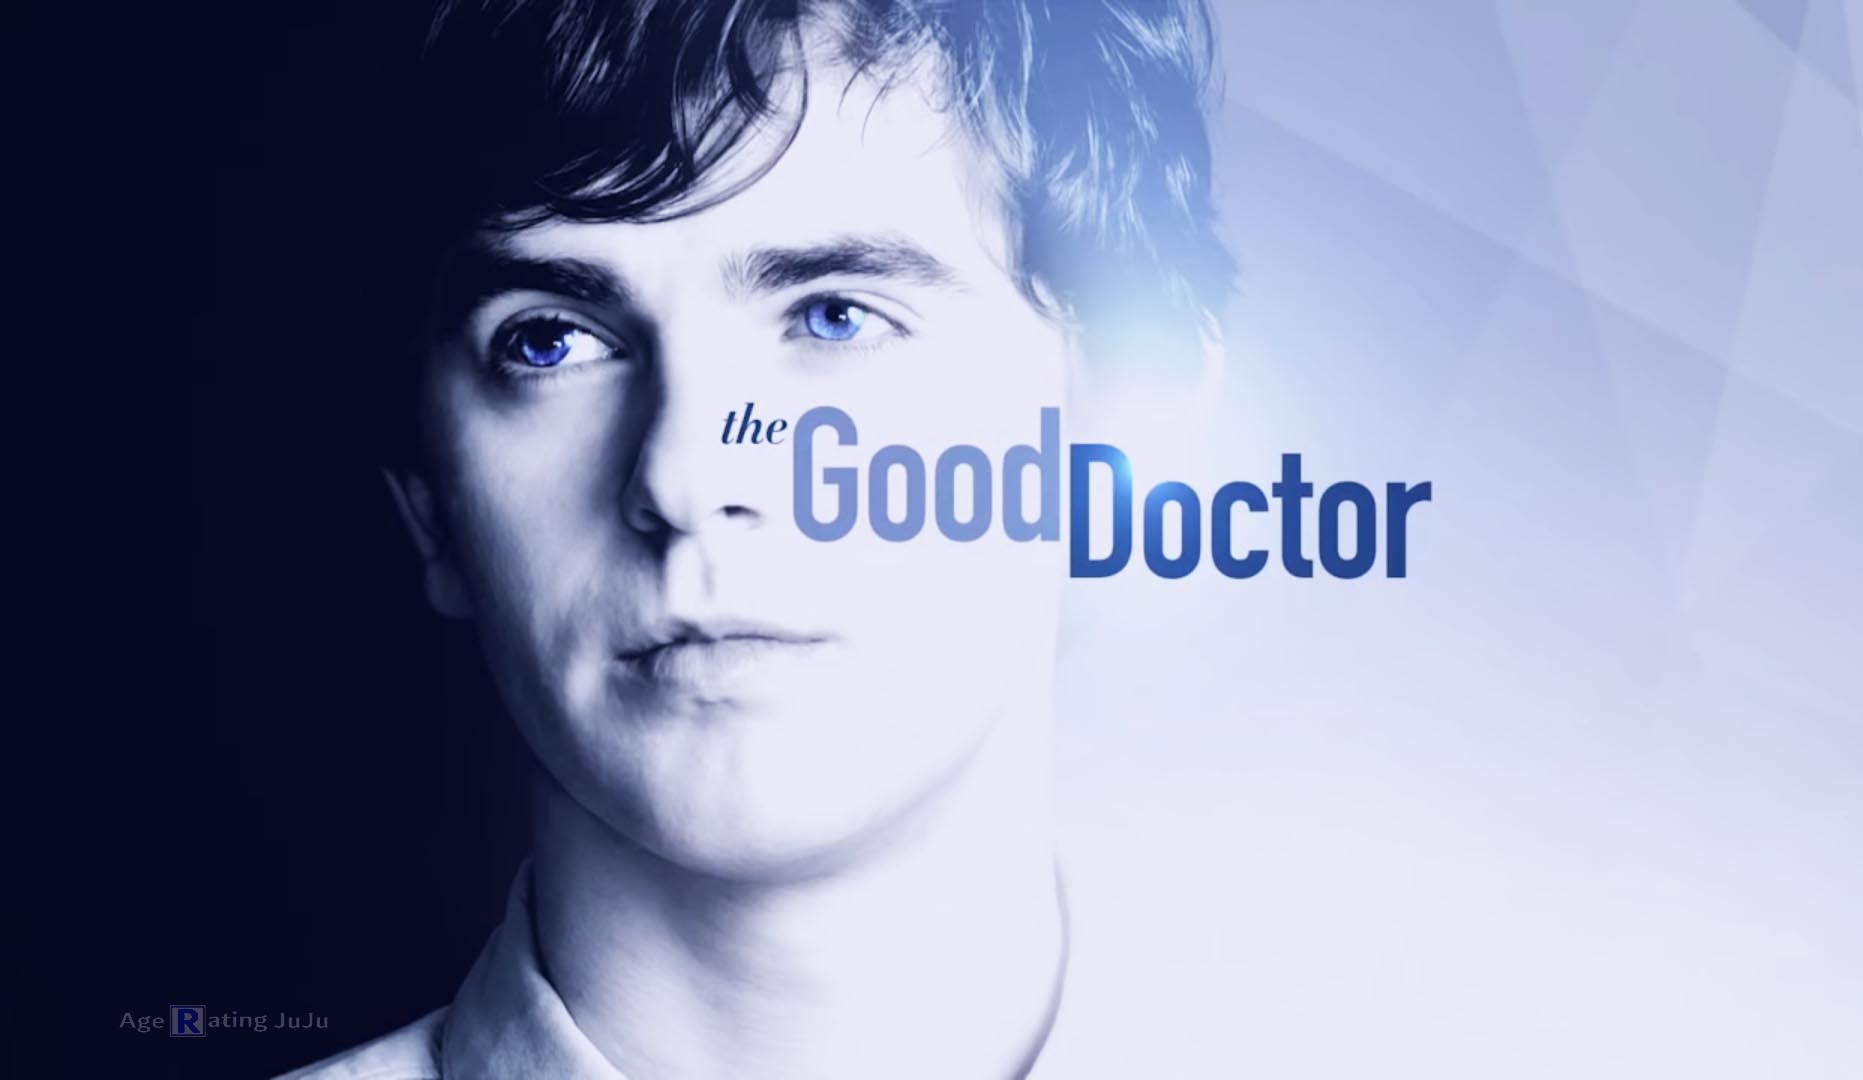 The Good Doctor Age Rating 2018 - TV Show Poster Images and Wallpapers